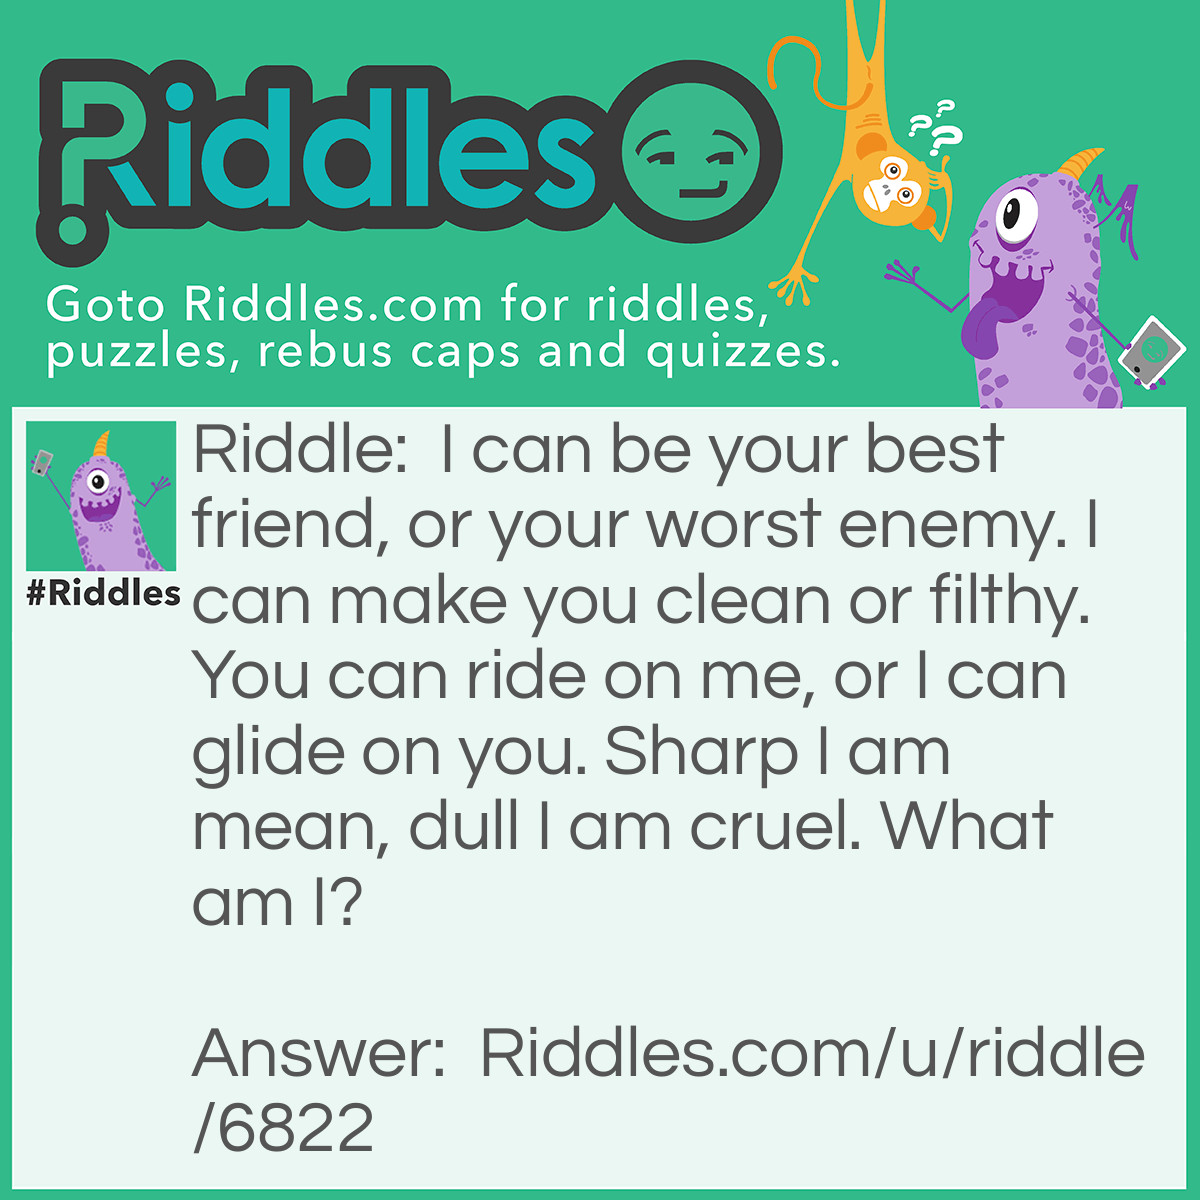 Riddle: I can be your best friend, or your worst enemy. I can make you clean or filthy. You can ride on me, or I can glide on you. Sharp I am mean, dull I am cruel. What am I? Answer: A Razor. (Razor is also a brand of scooters).